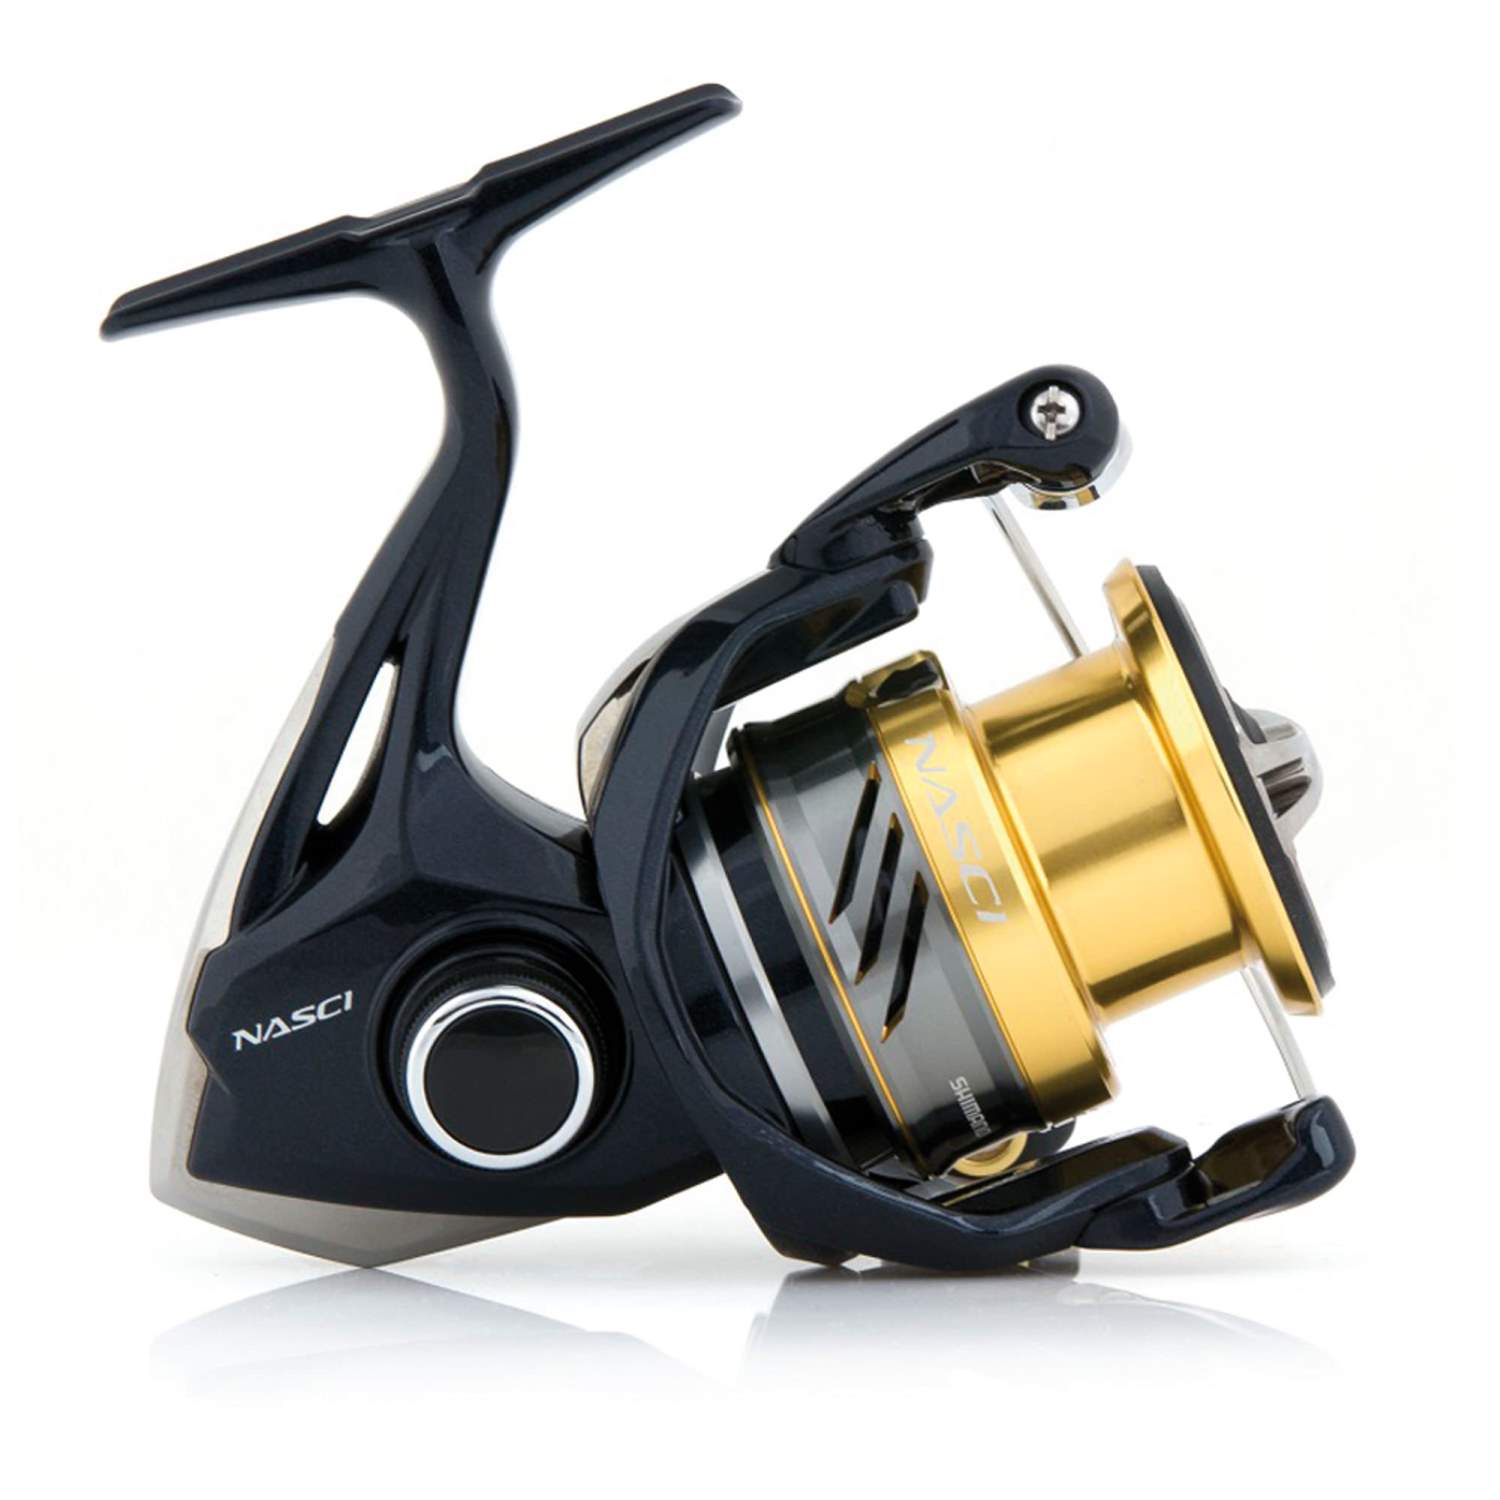 Angelrolle Spinnrolle Shimano Nasci FB 1000